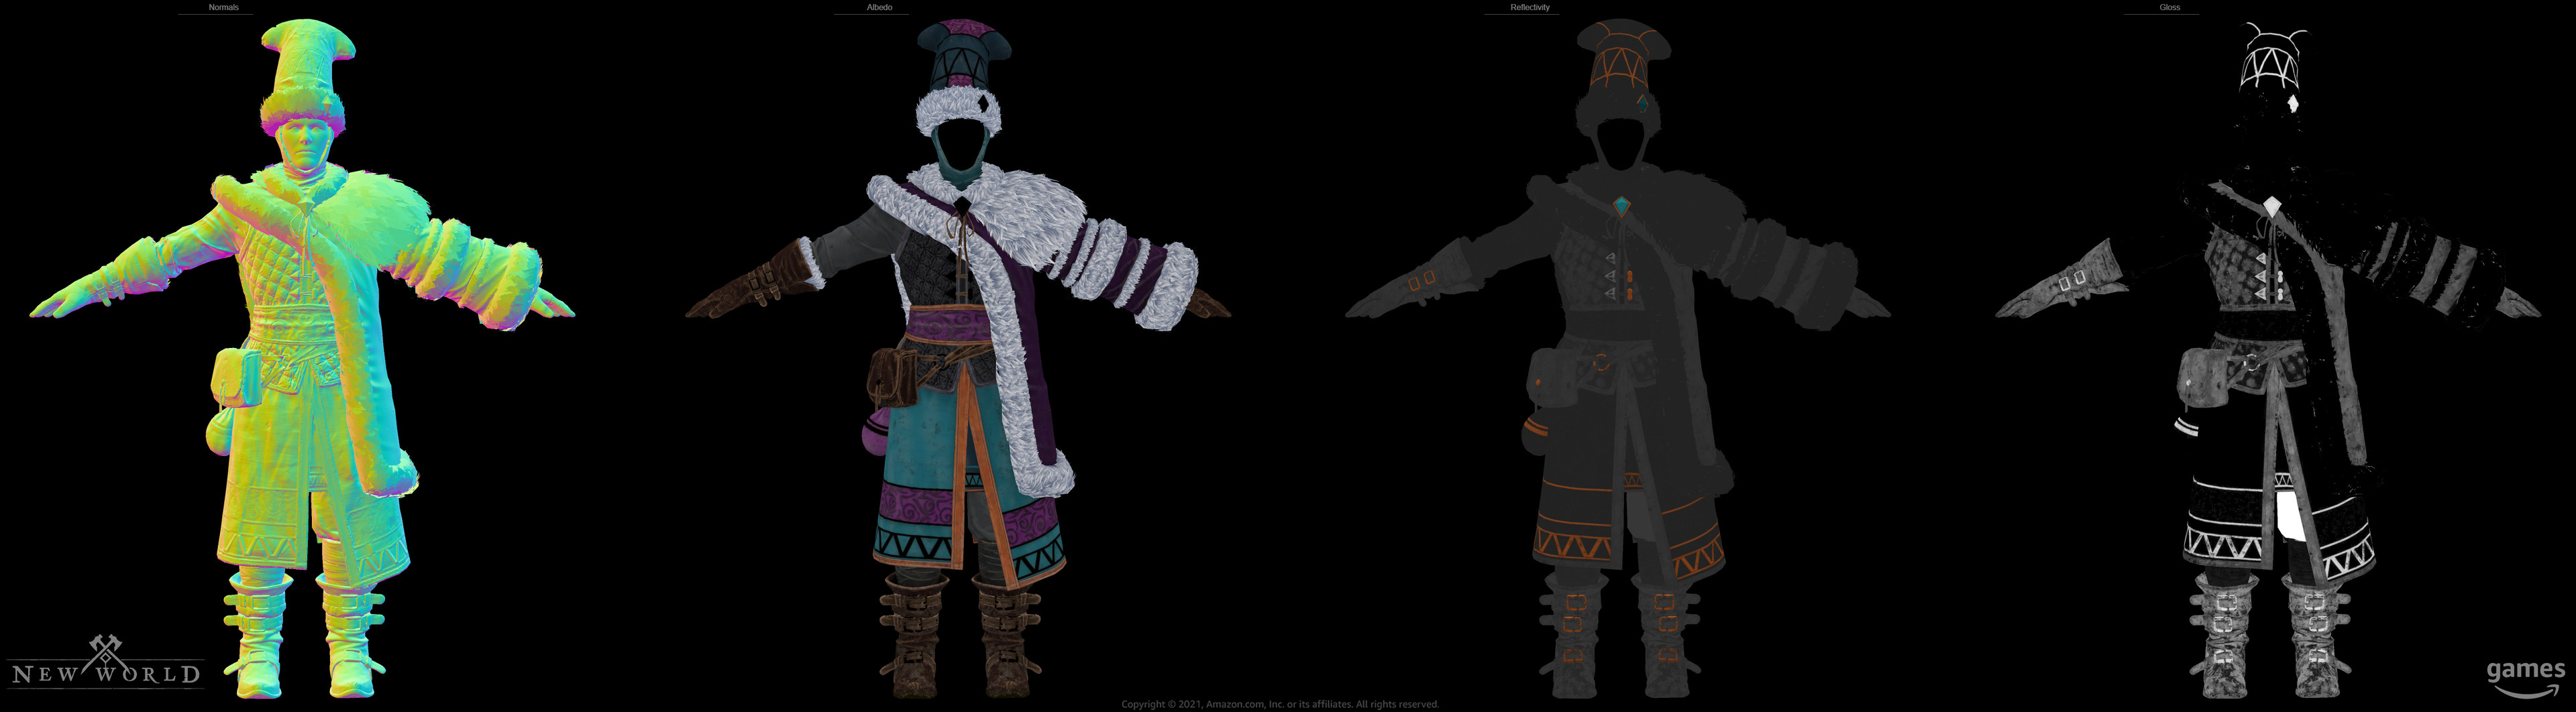 Winter Convergence Outfit Texture Breakdown